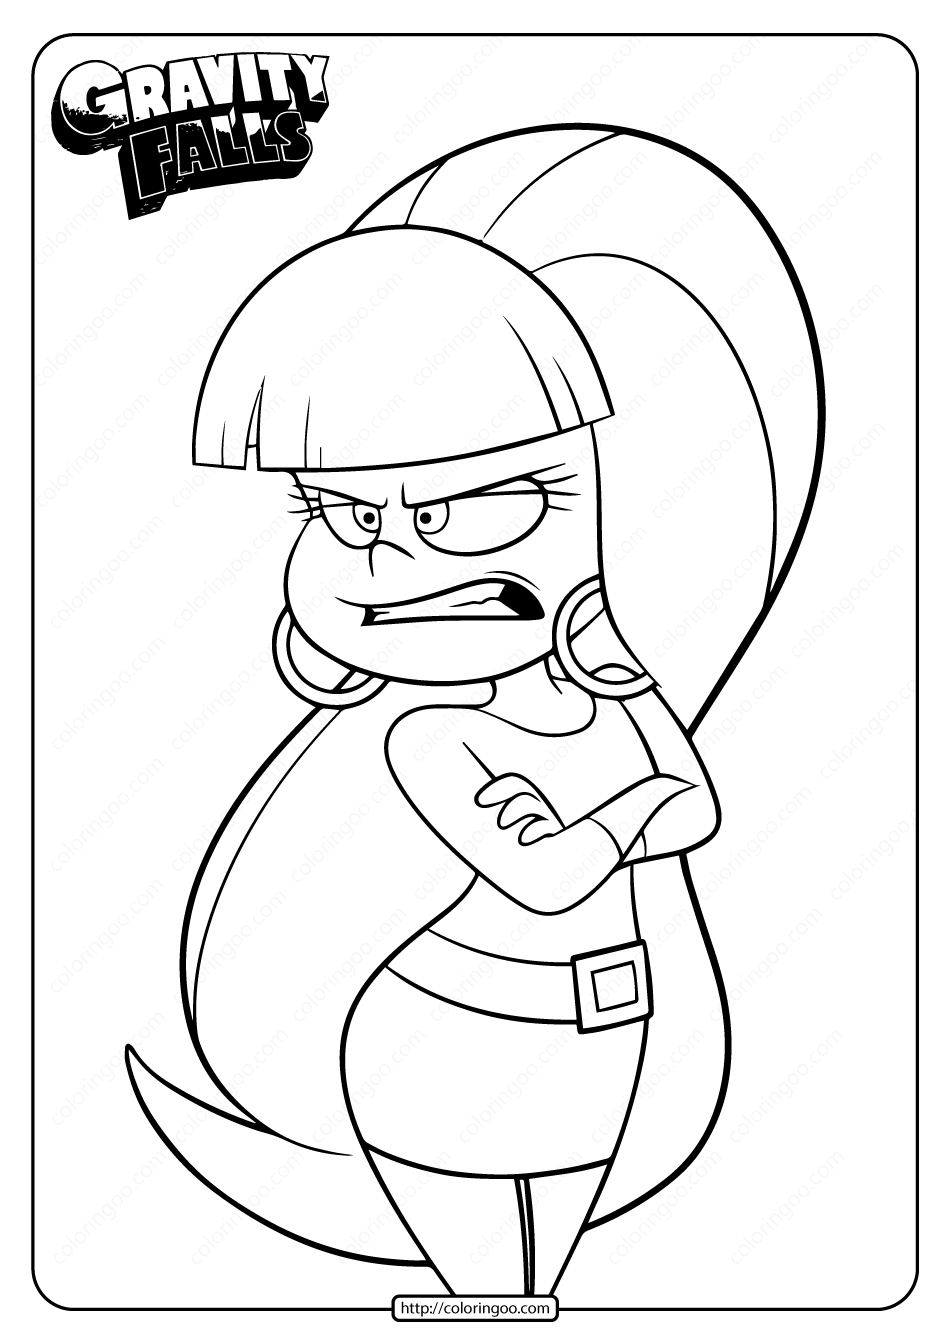 Printable Gravity Falls Angry Pasifica Coloring Page